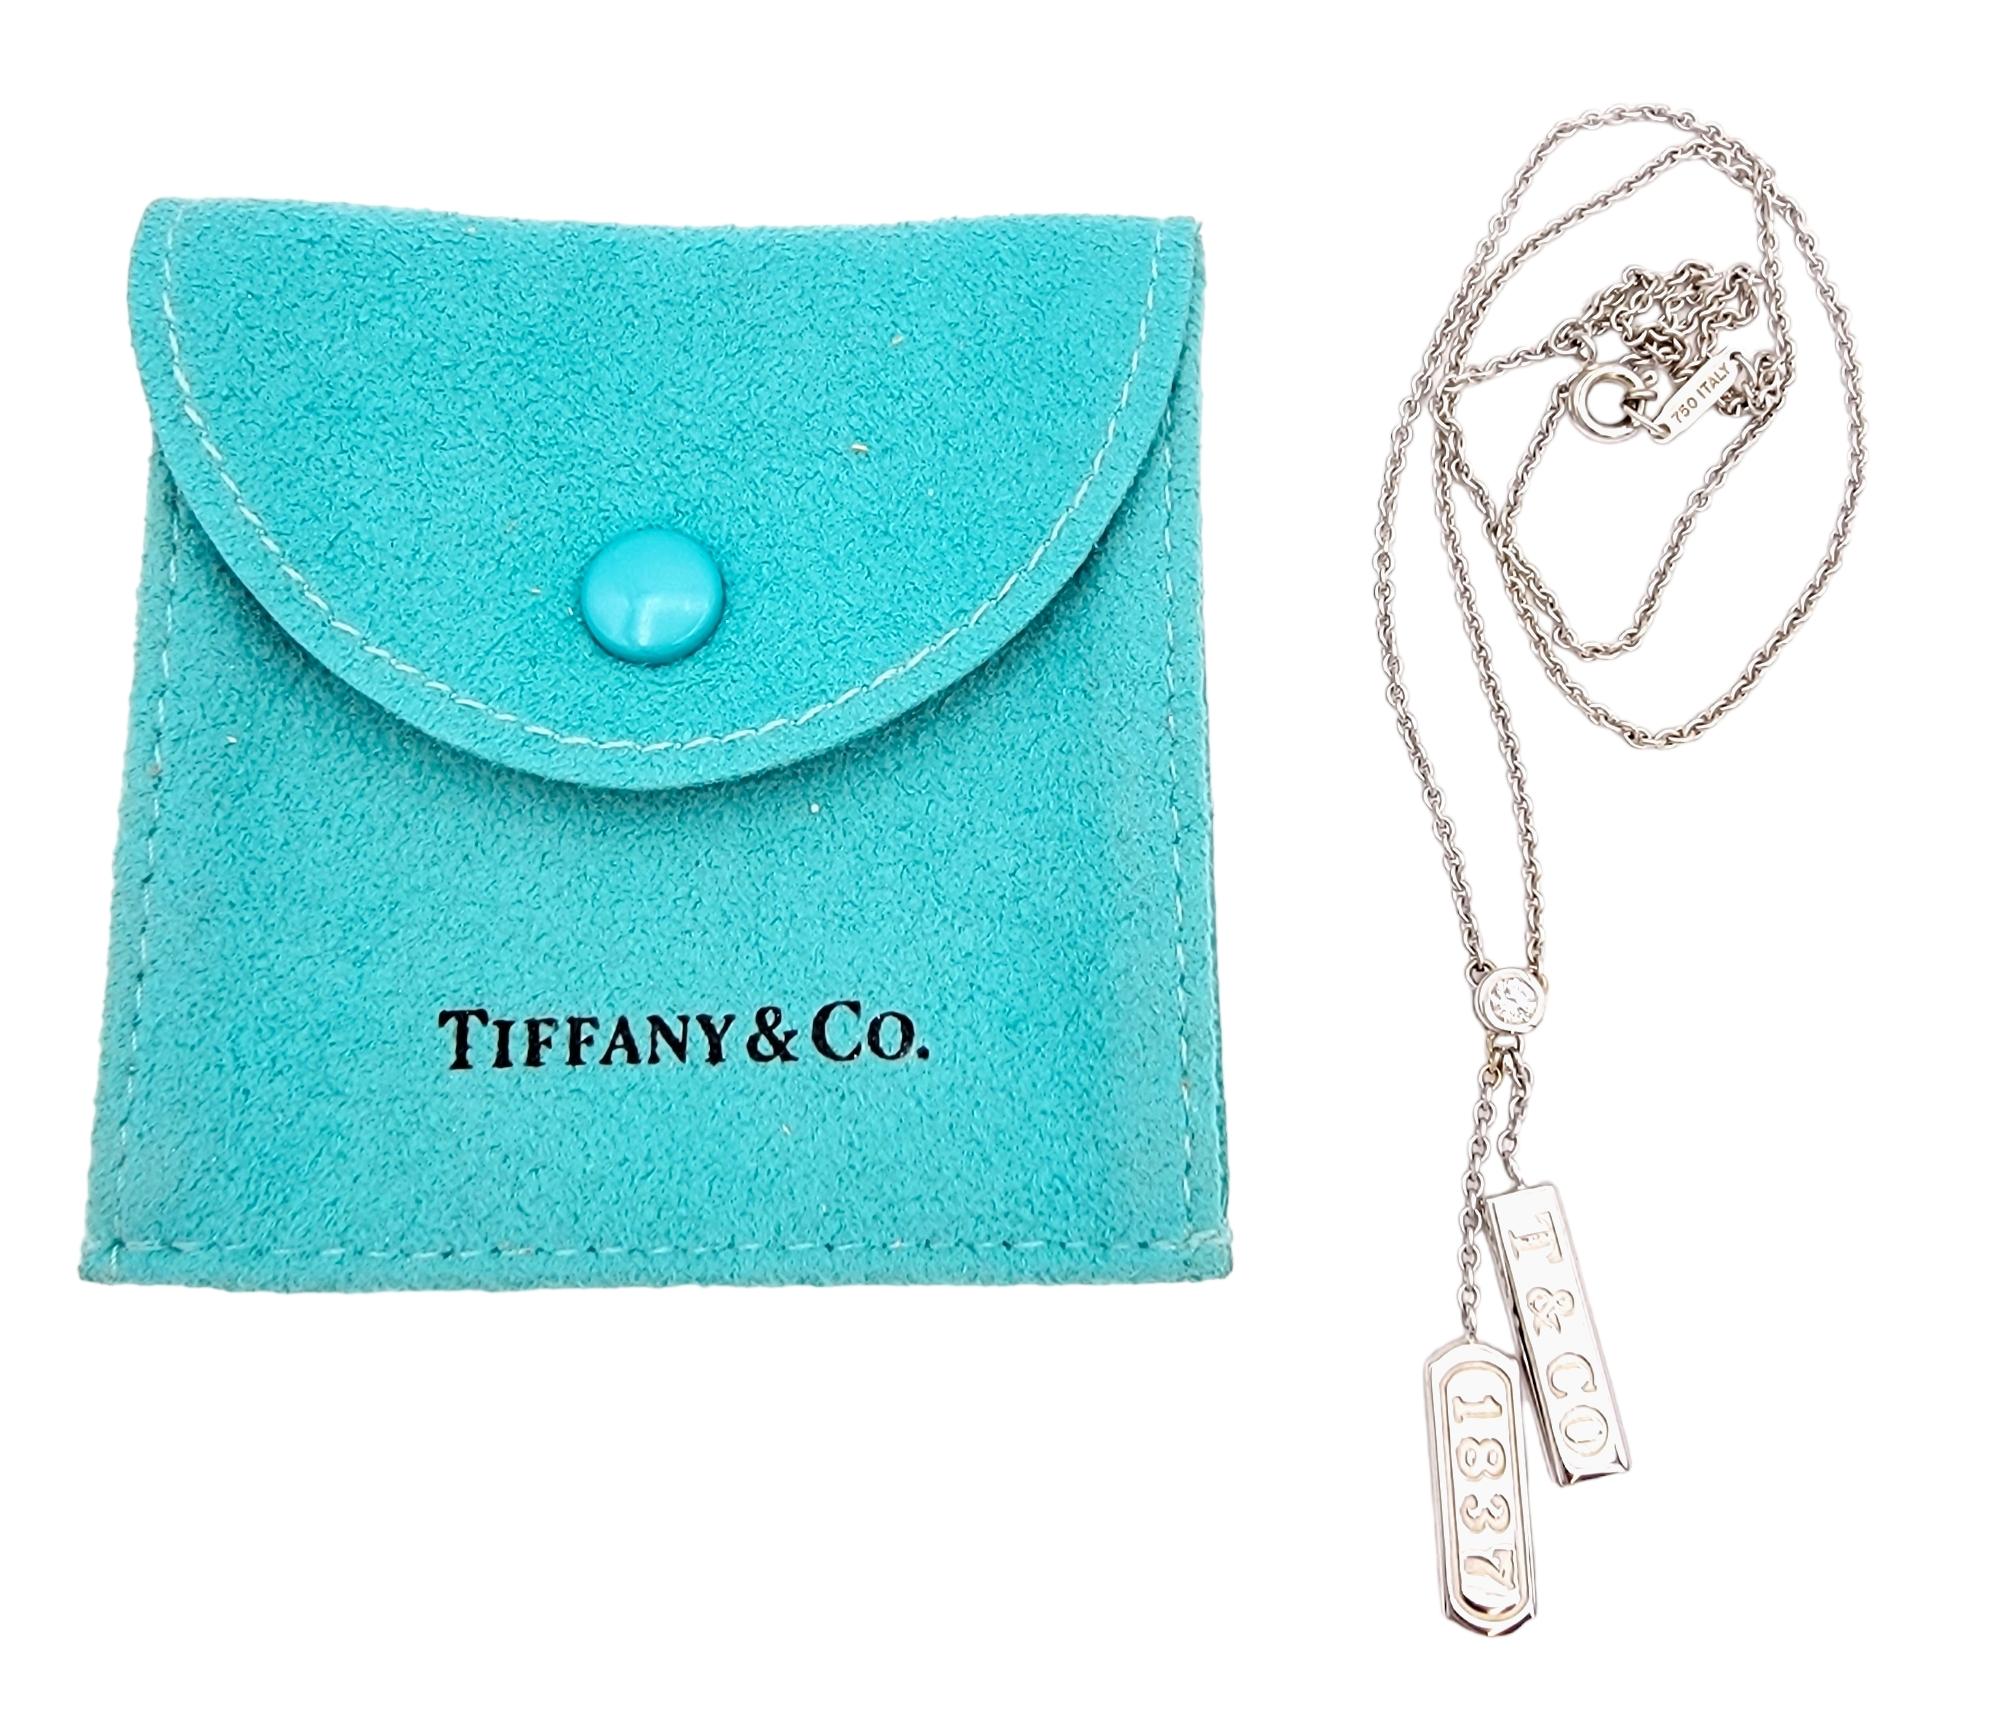 Tiffany & Co. 1837 Double Bar Pendant Necklace with Diamonds in 18K White Gold In Good Condition For Sale In Scottsdale, AZ